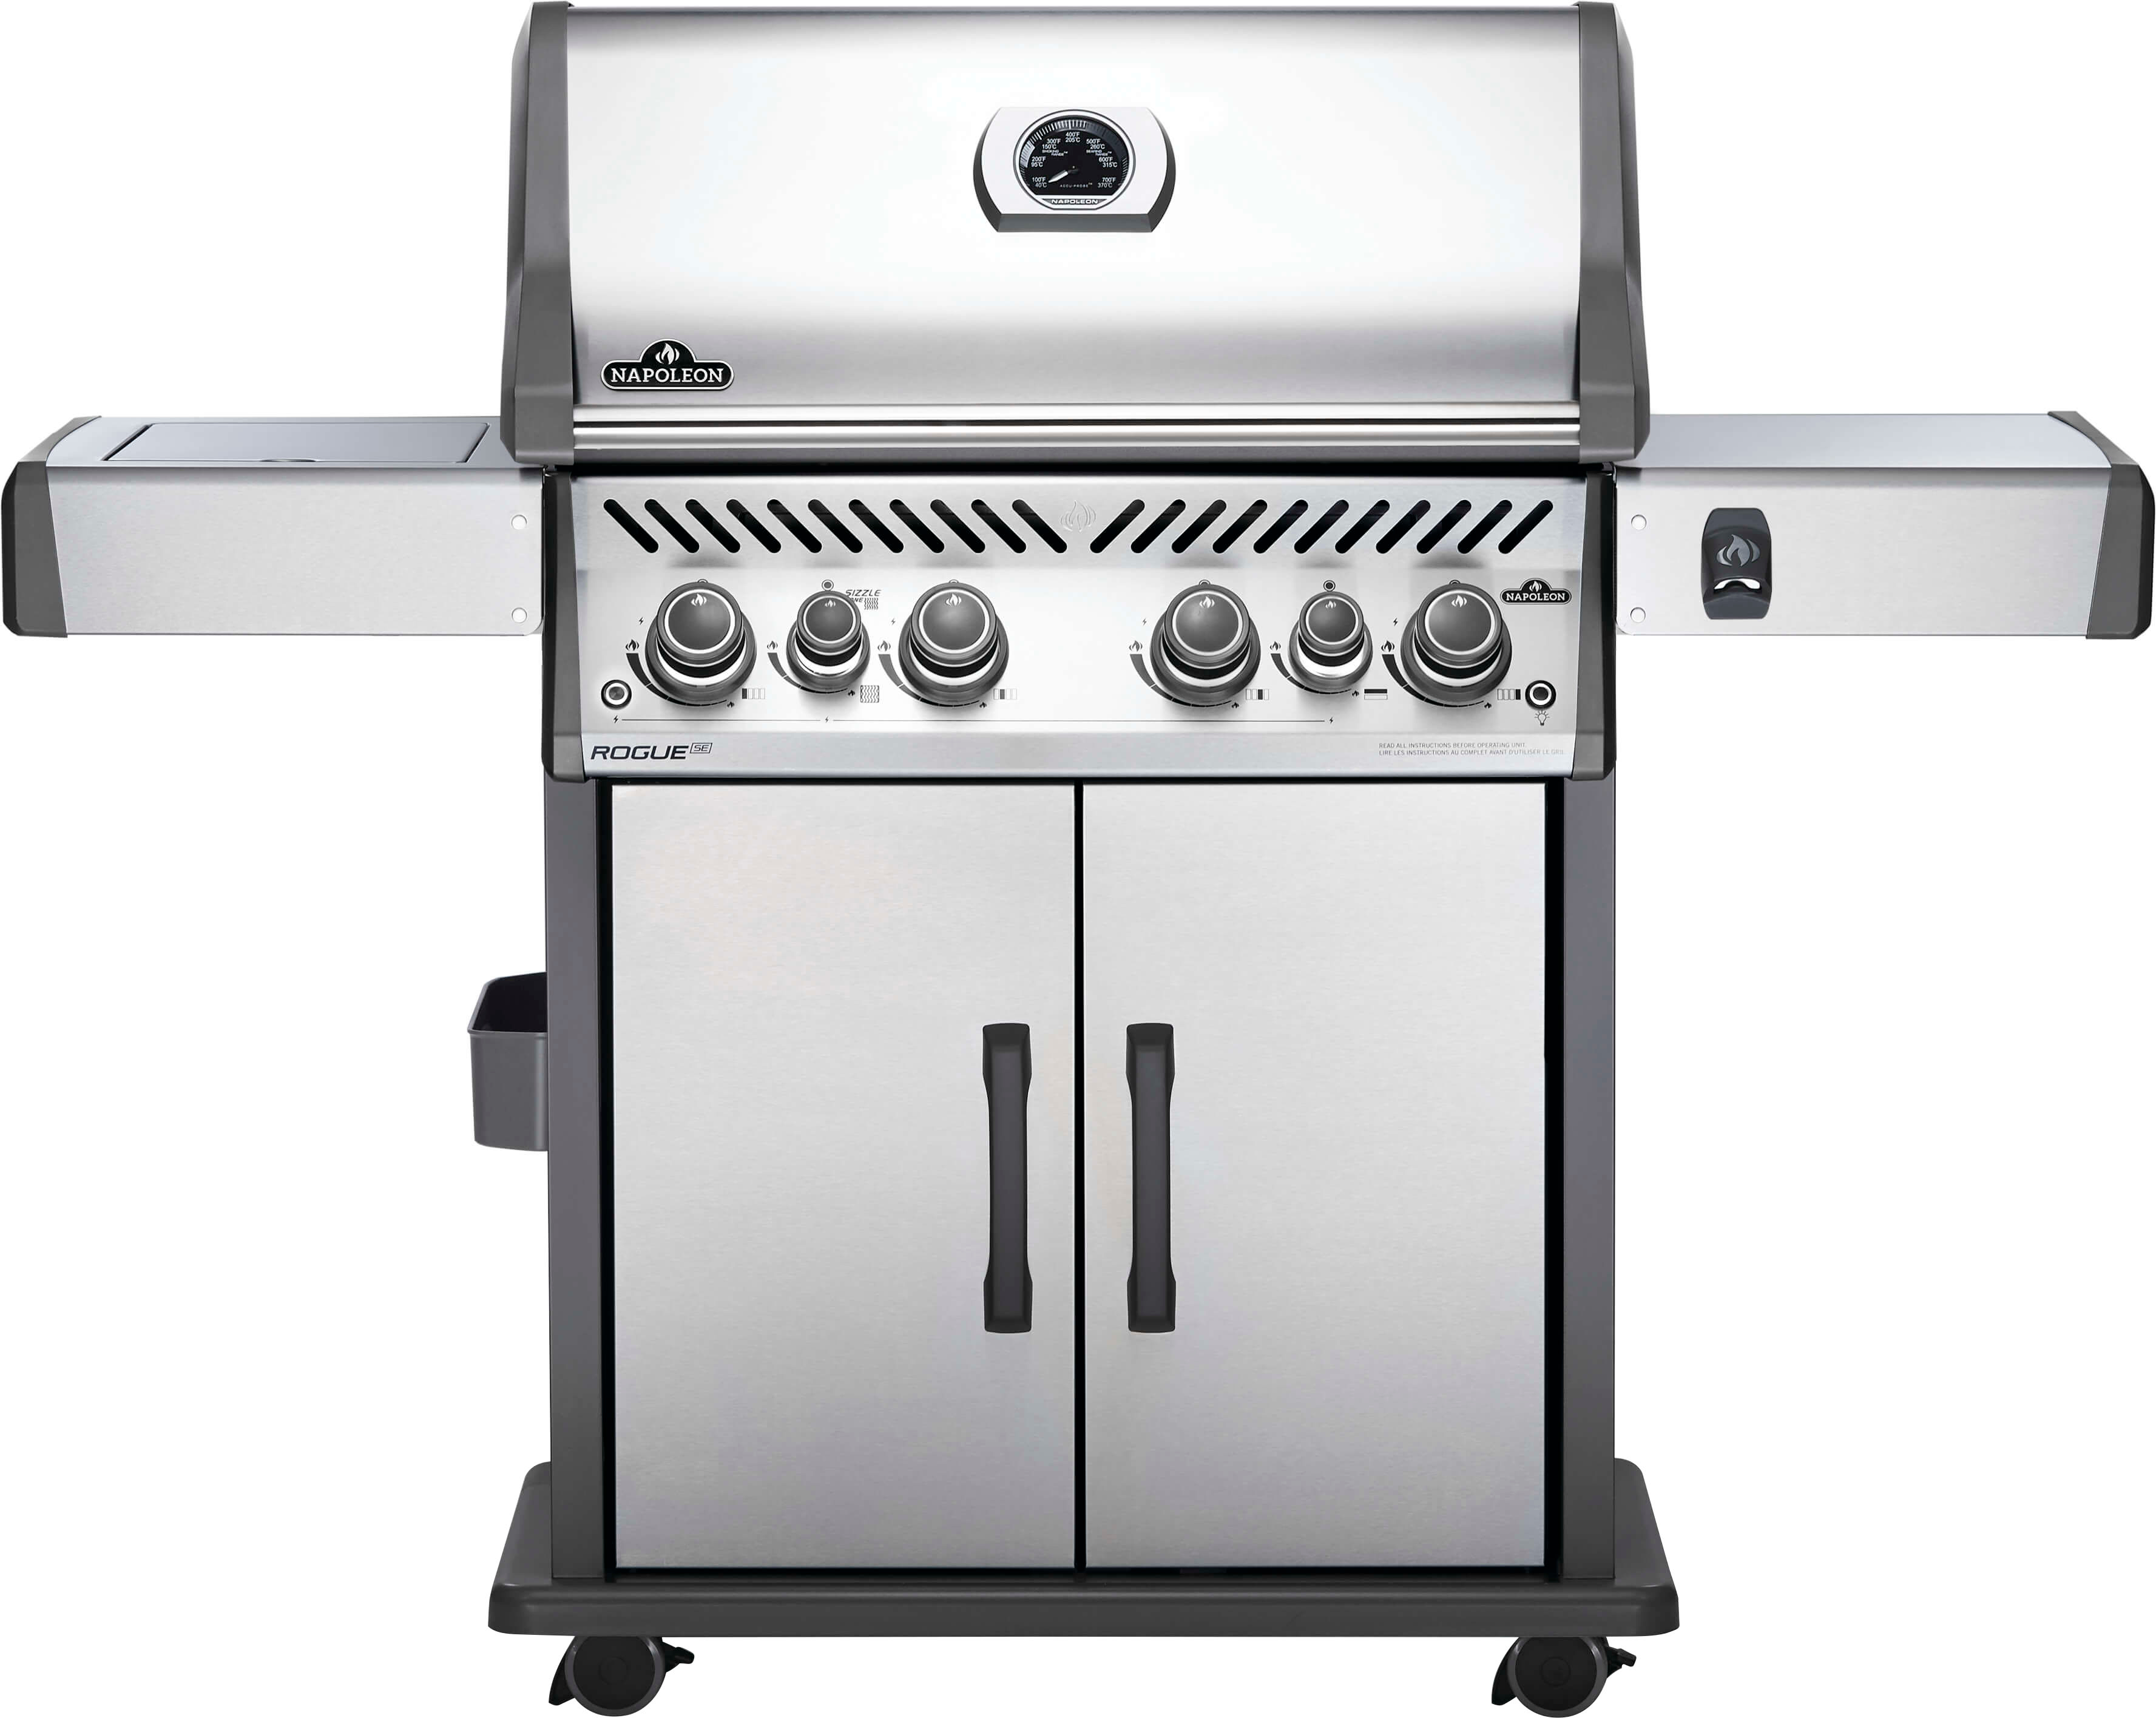 0629162134868 - NAPOLEON - ROGUE SE 525 NATURAL GAS GRILL WITH INFRARED REAR AND SIDE BURNERS, STAINLESS STEEL - STAINLESS STEEL